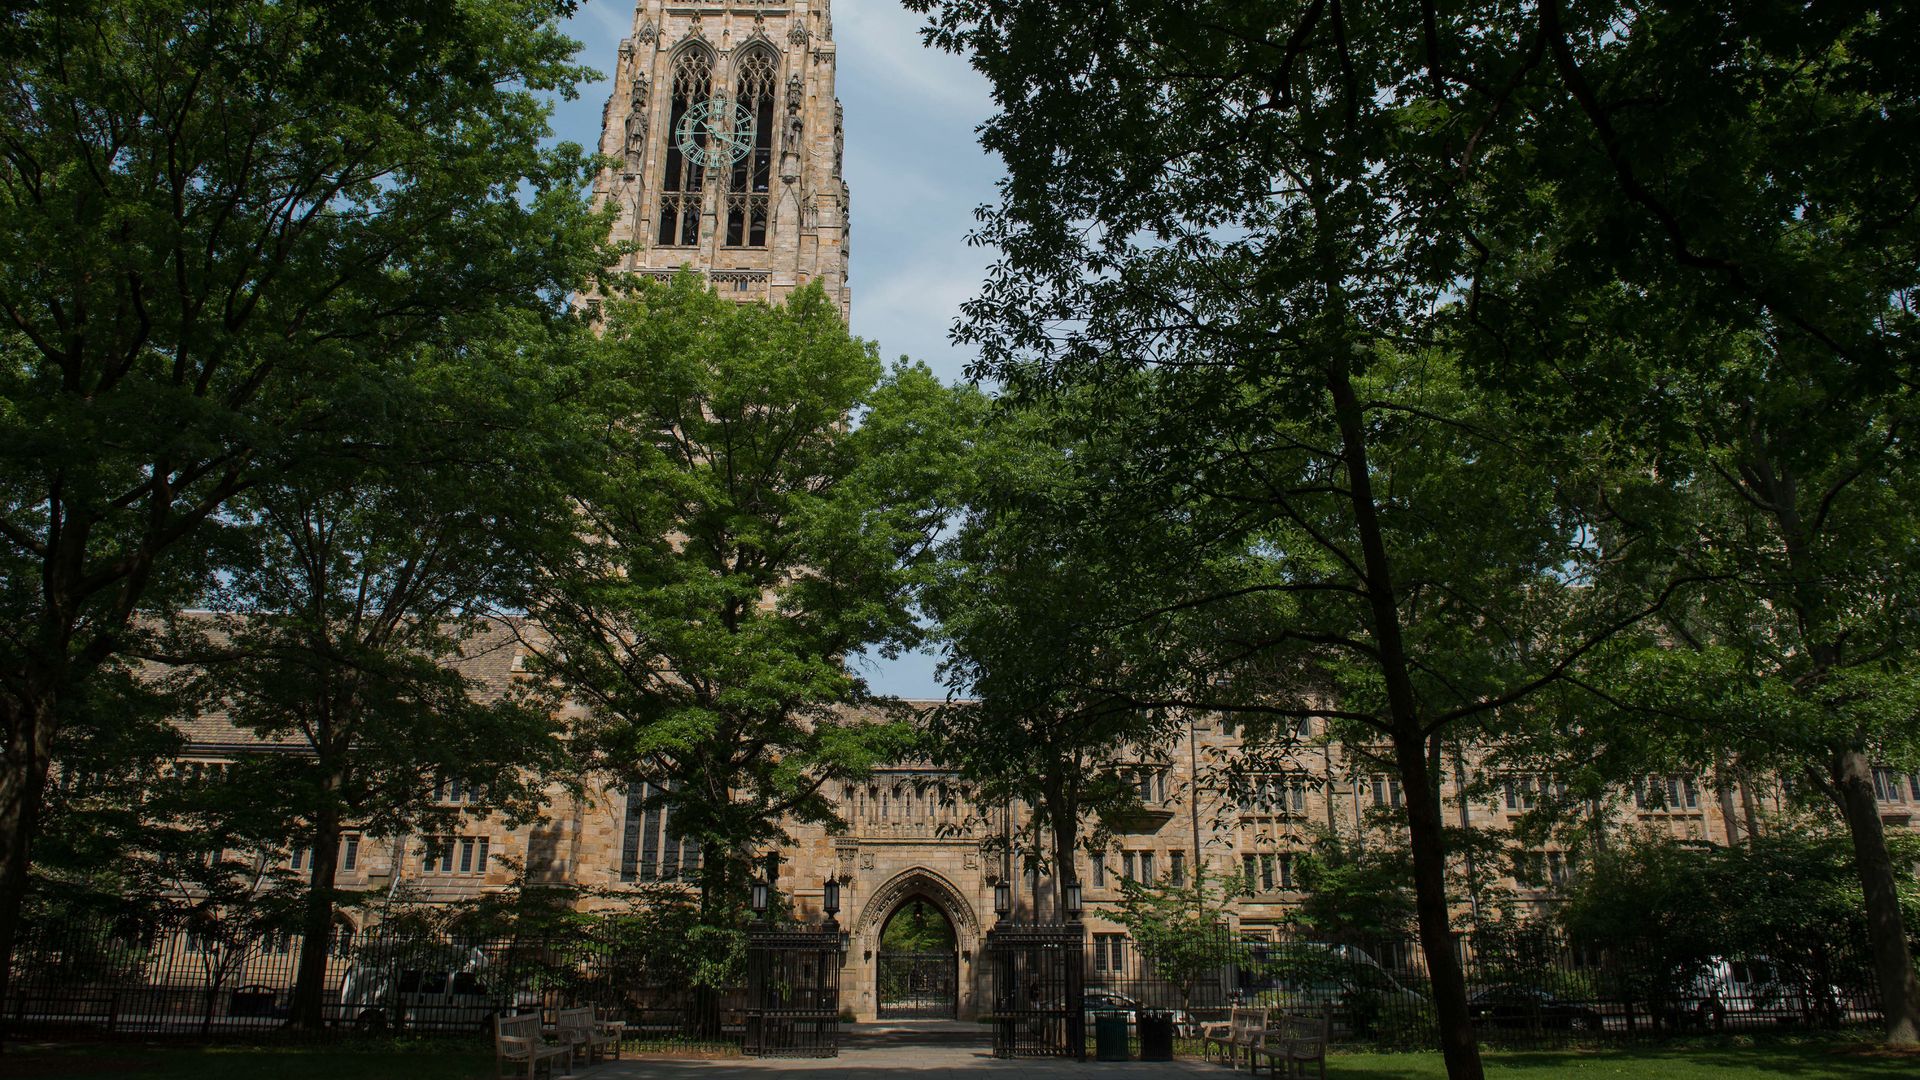 Harkness Tower stands on the Yale University campus